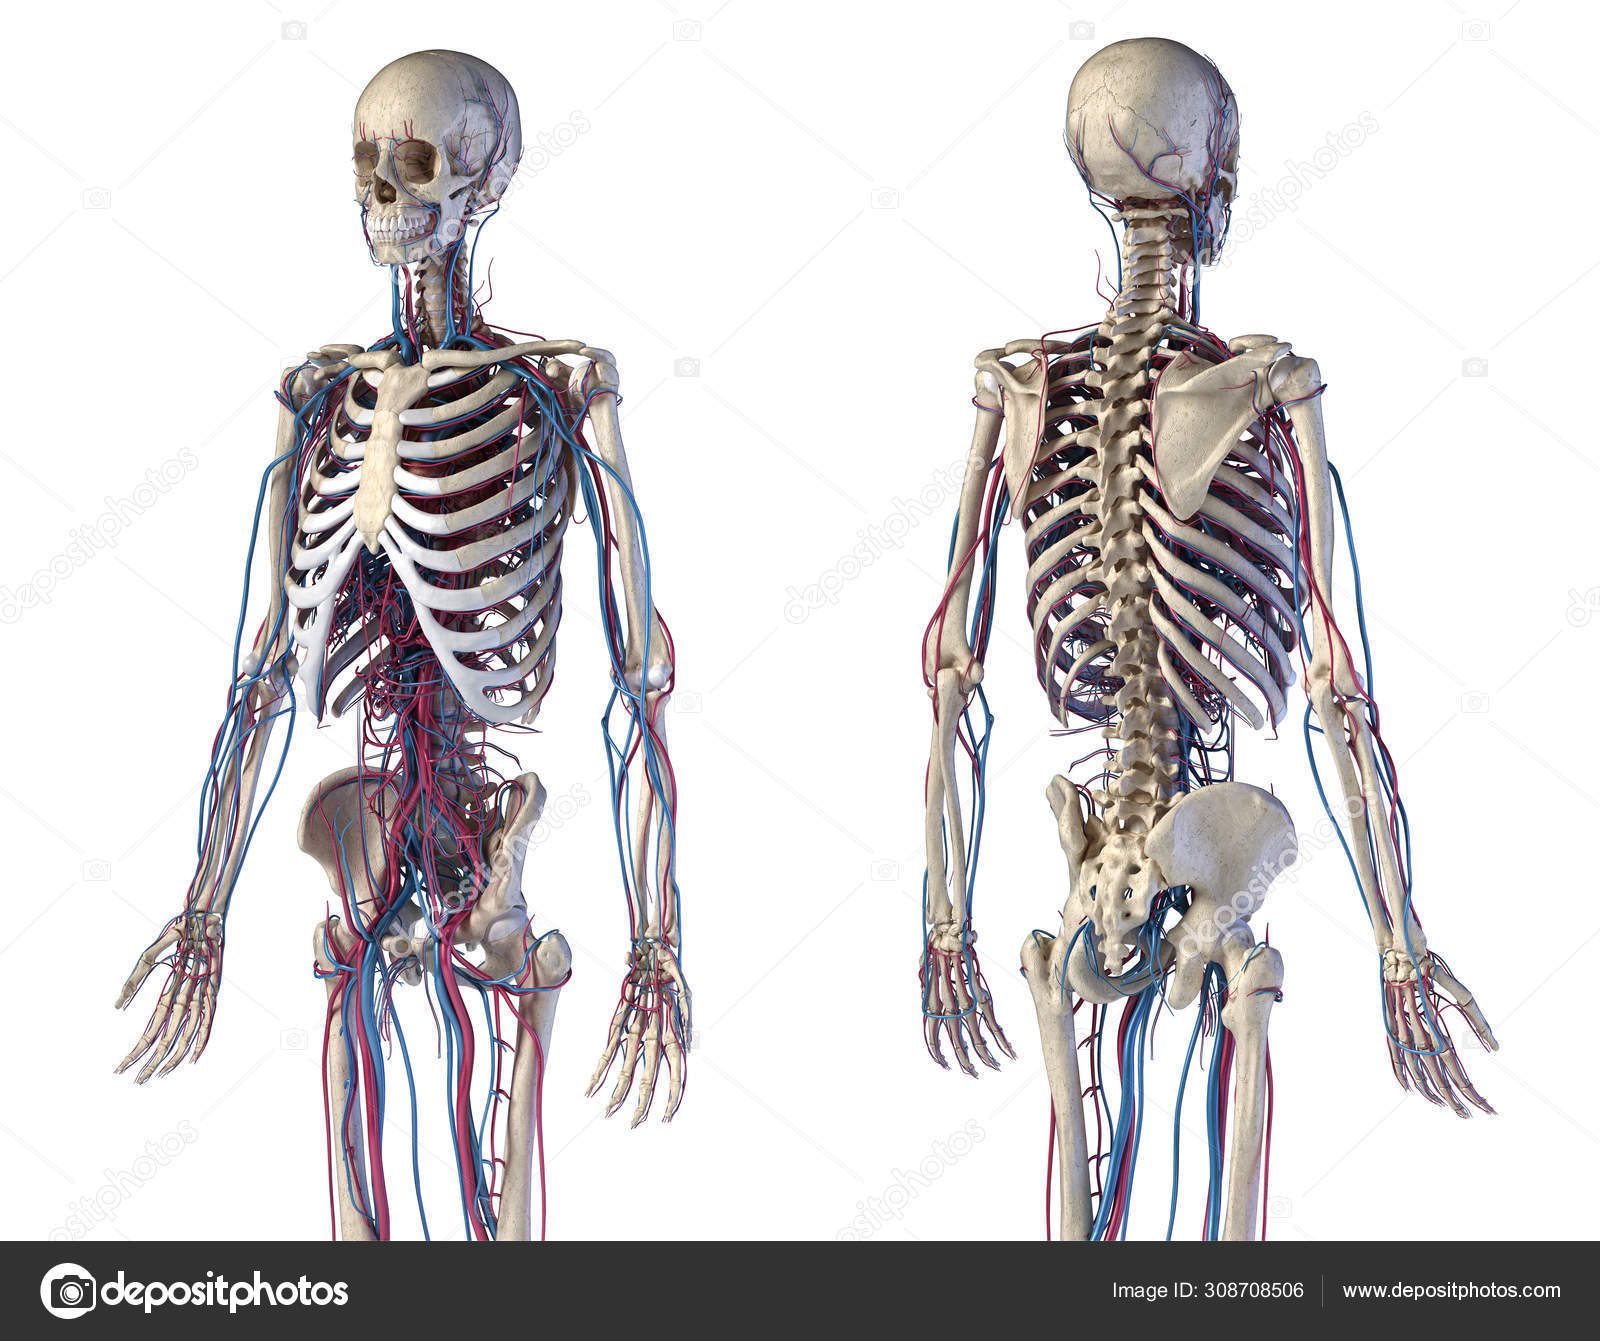 Human Body Anatomy Skeleton With Veins And Arteries Front And Back Views Stock Photo Image By C Pixelchaos 308708506